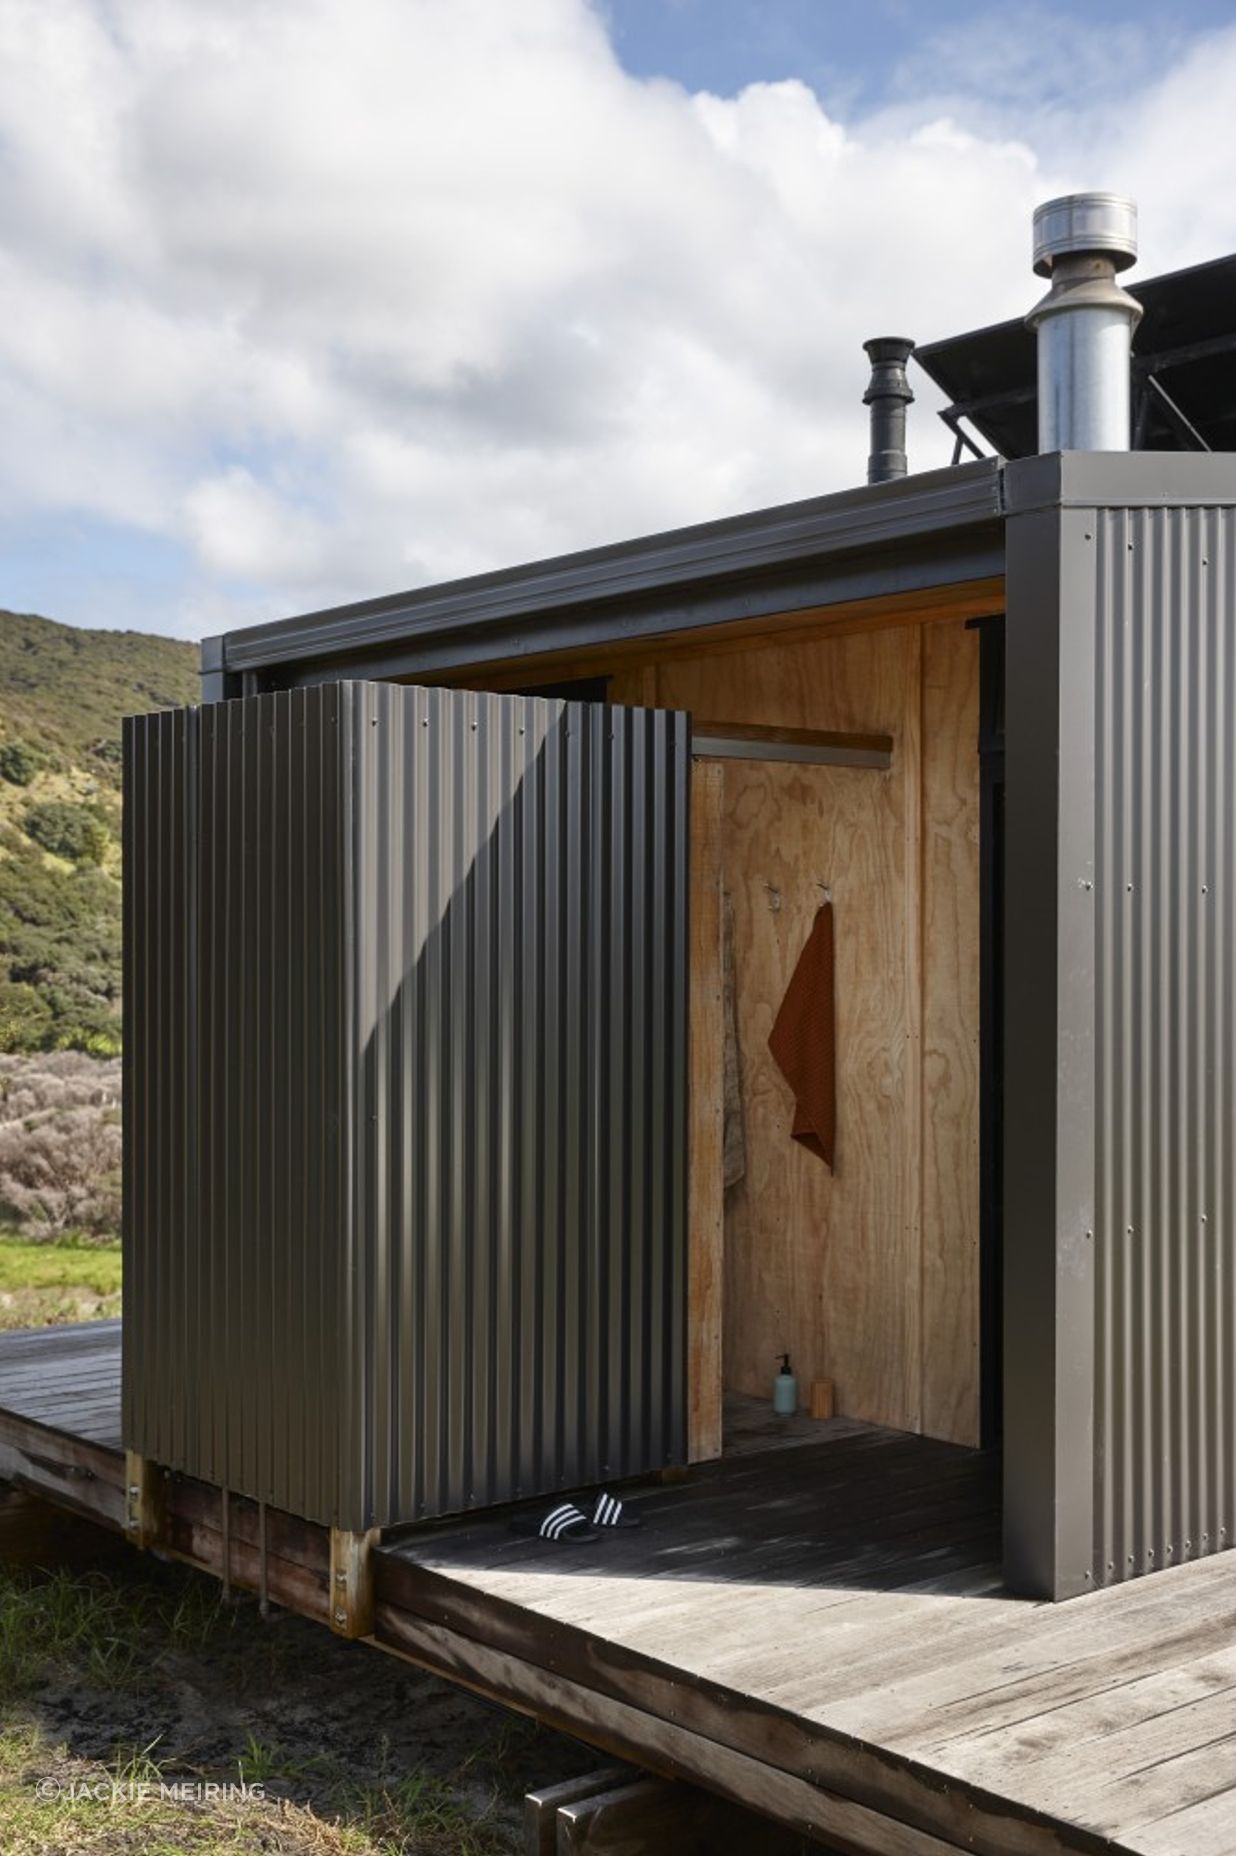 An outdoor shower is formed using corrugated iron and timber.